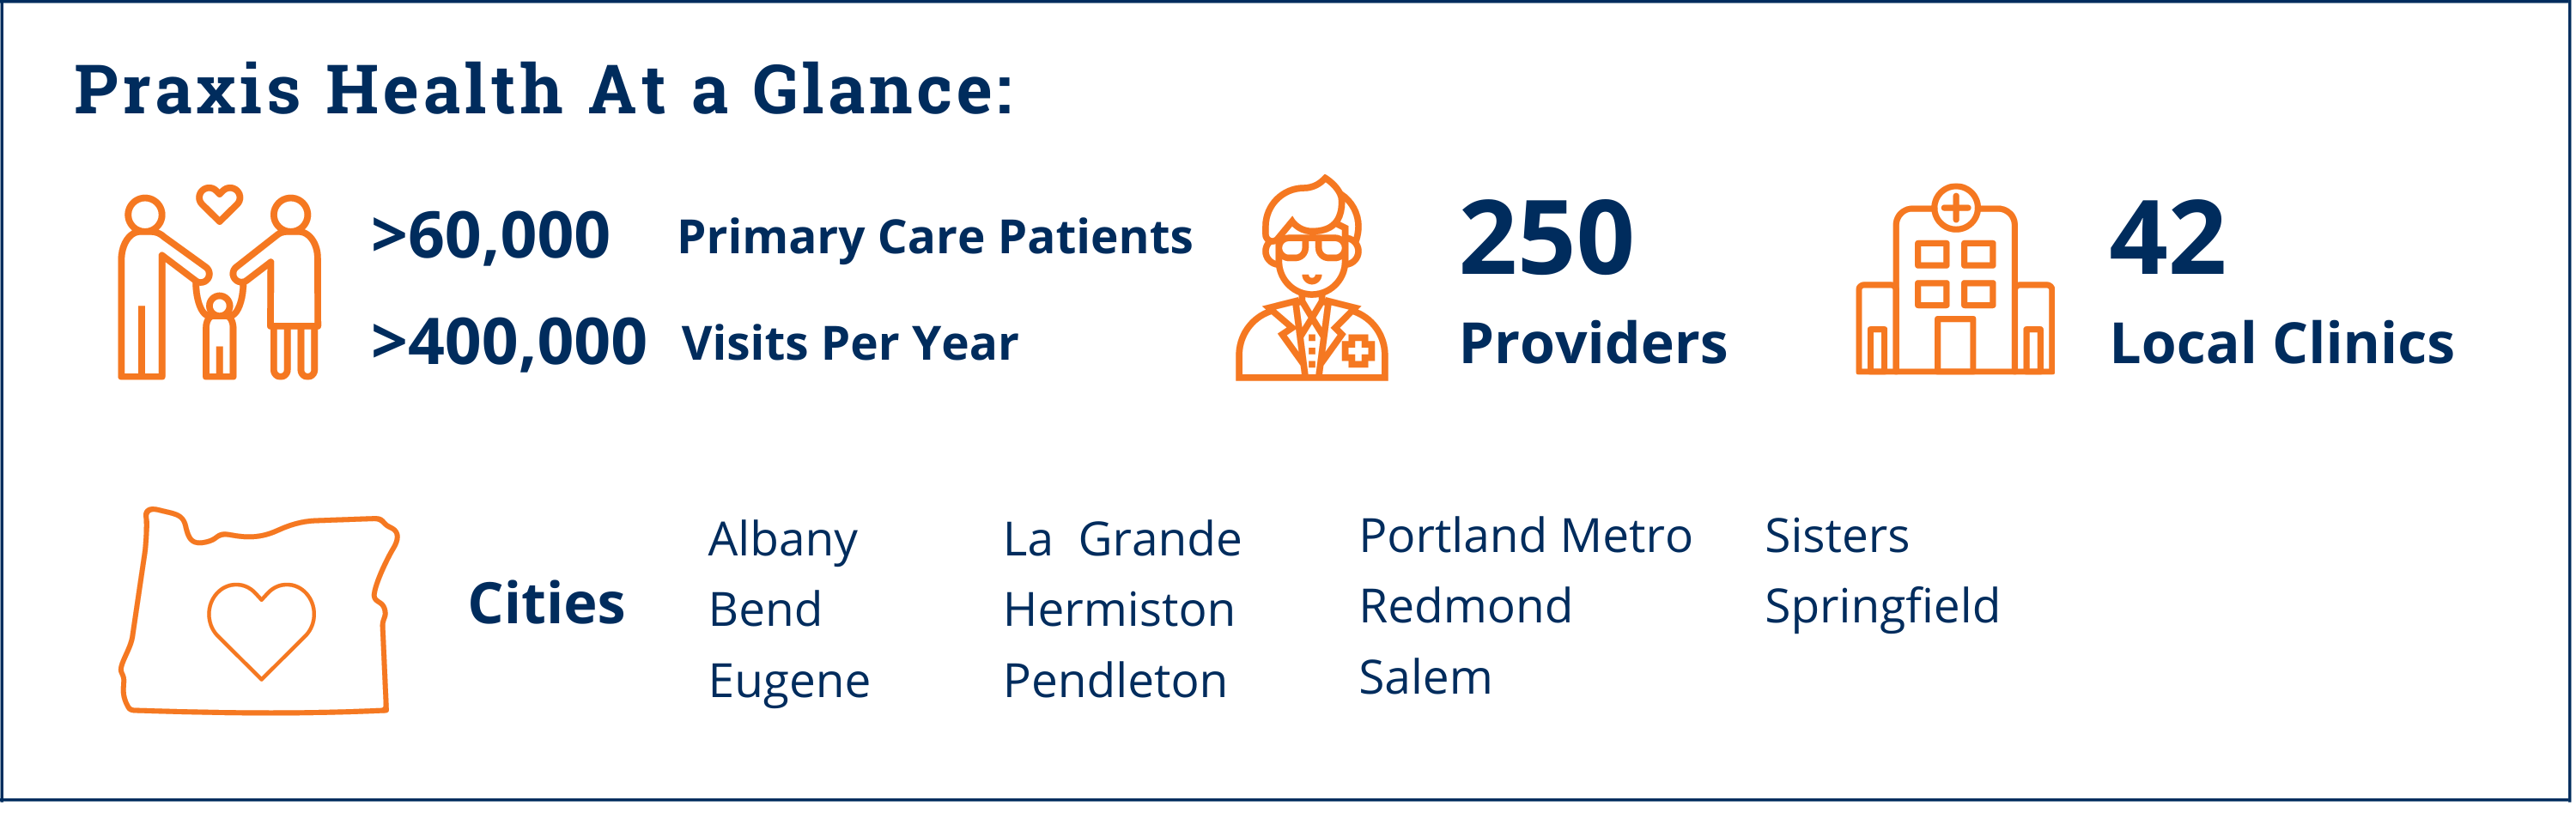 Praxis Health at a Glance | South Salem Primary Care